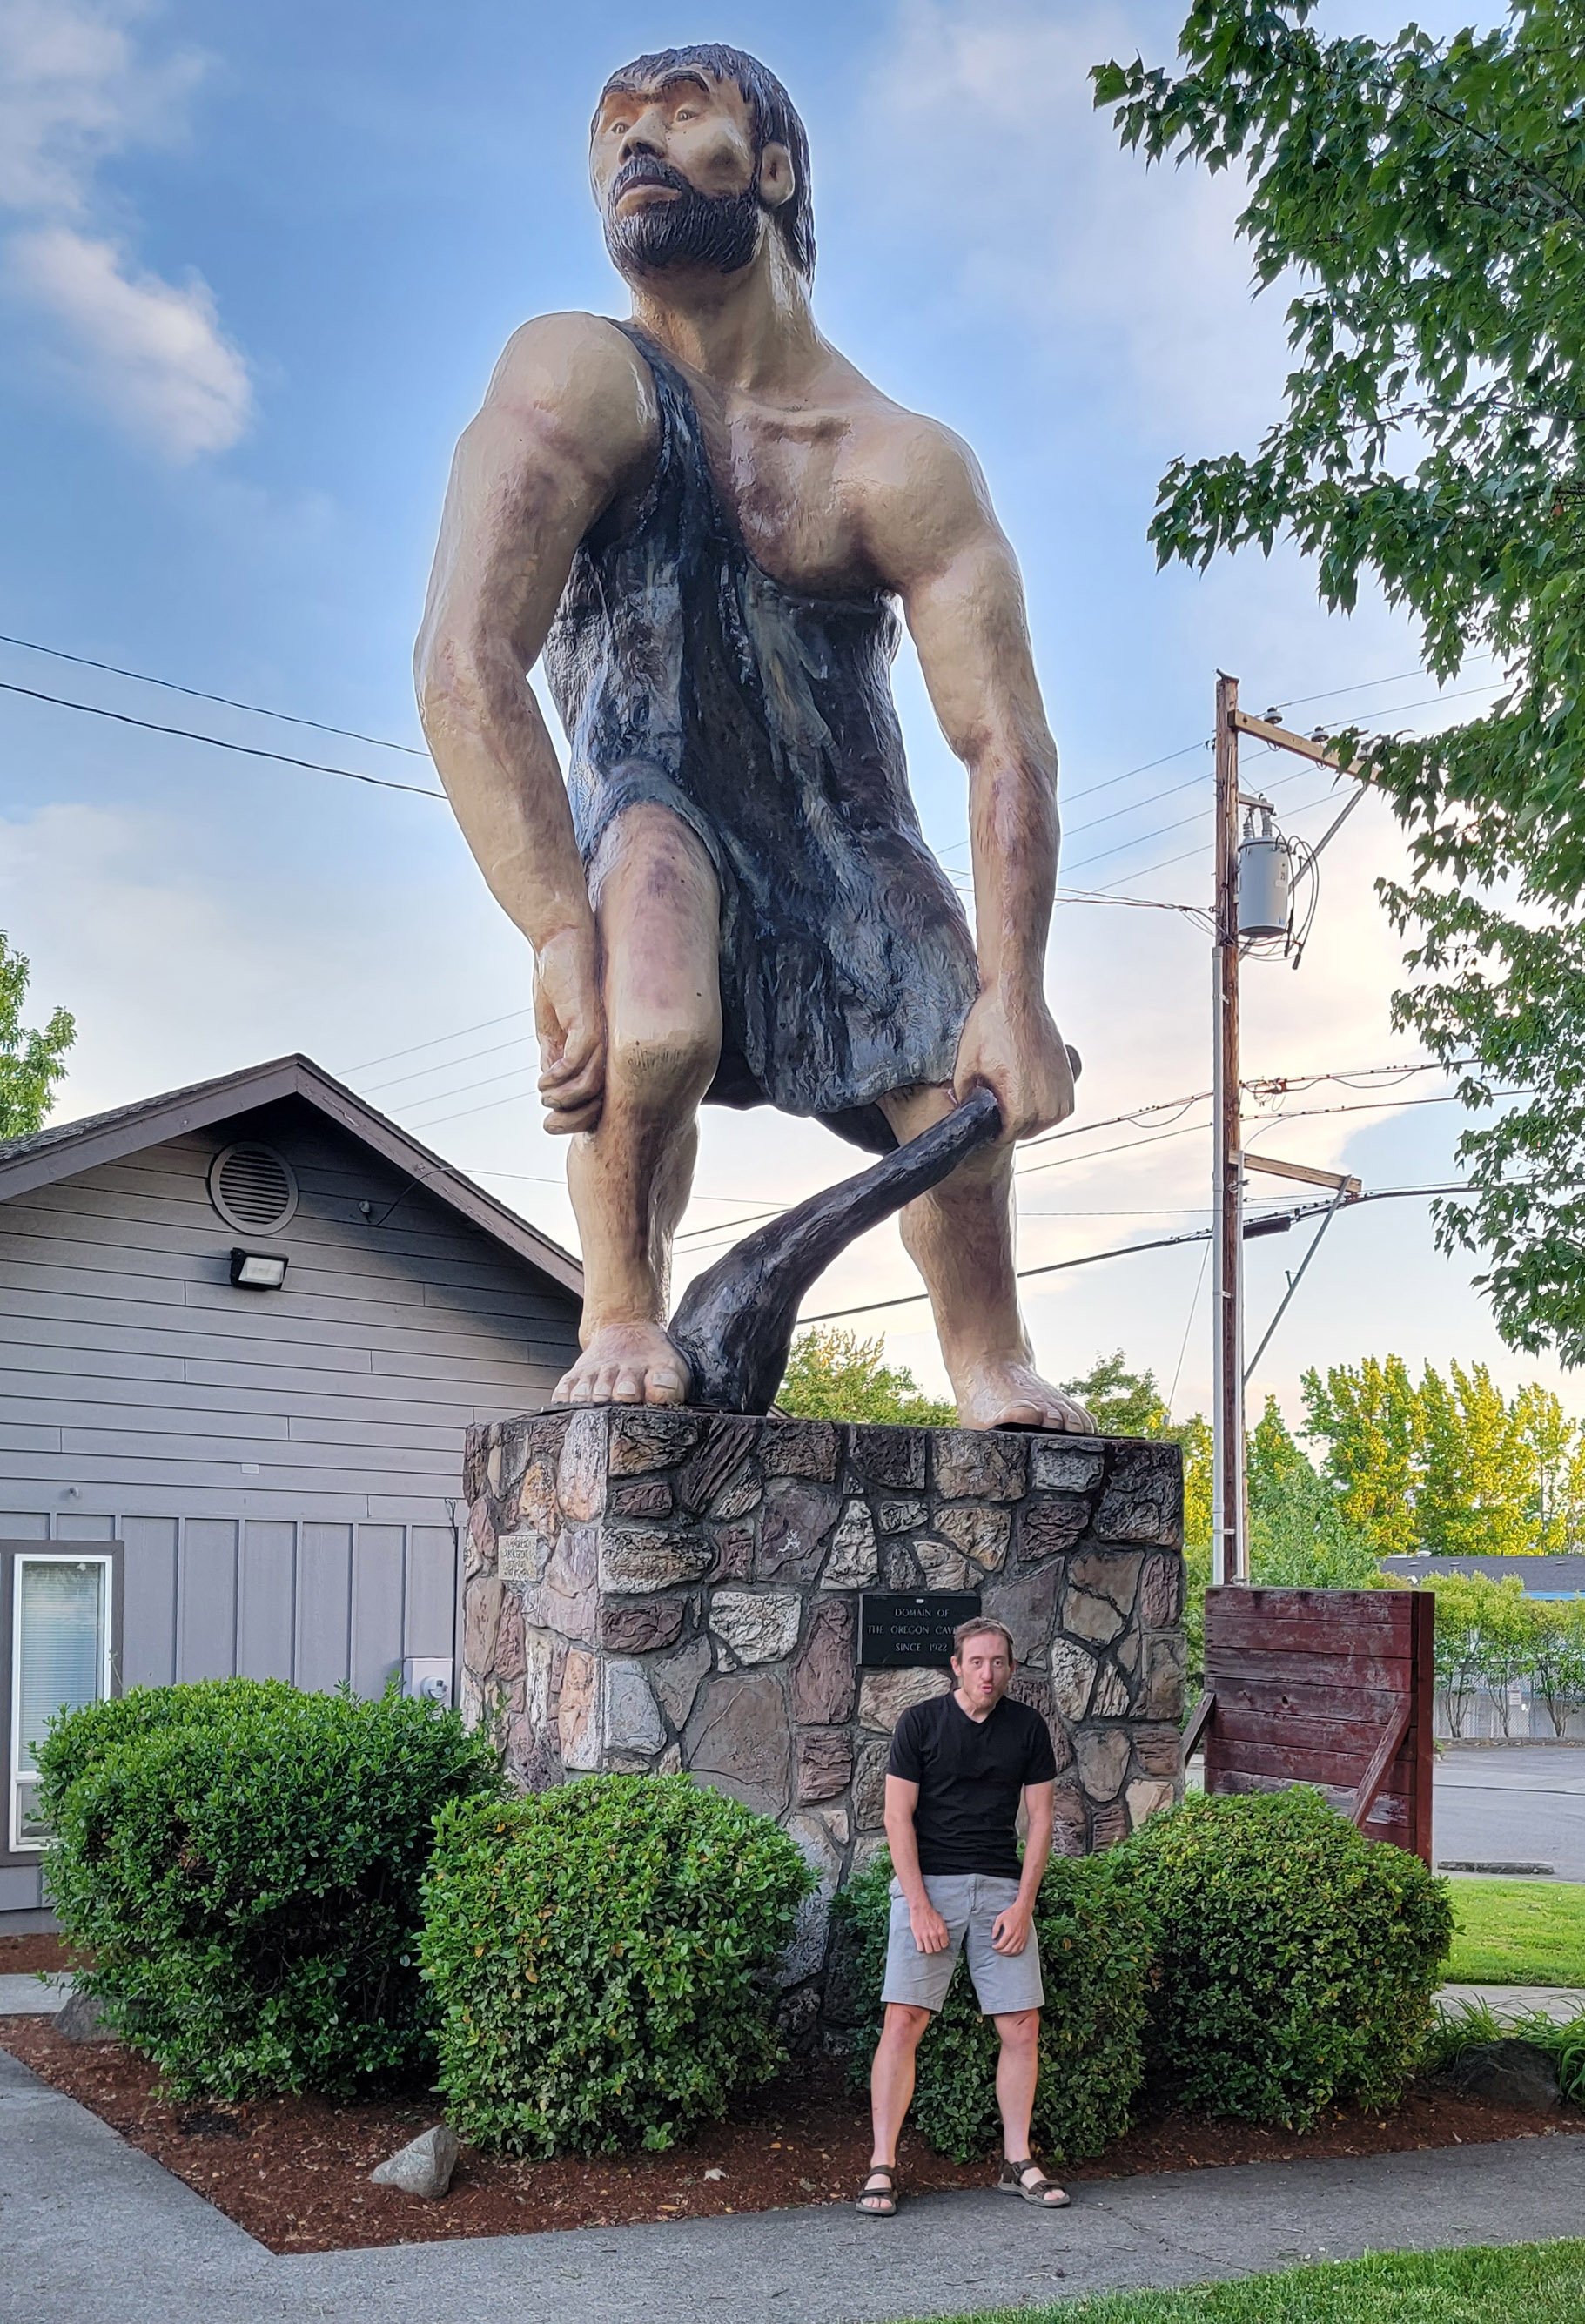  Grants Pass Caveman. There’s a mild caveman theme here. I think they’re leaning into the metheads. 